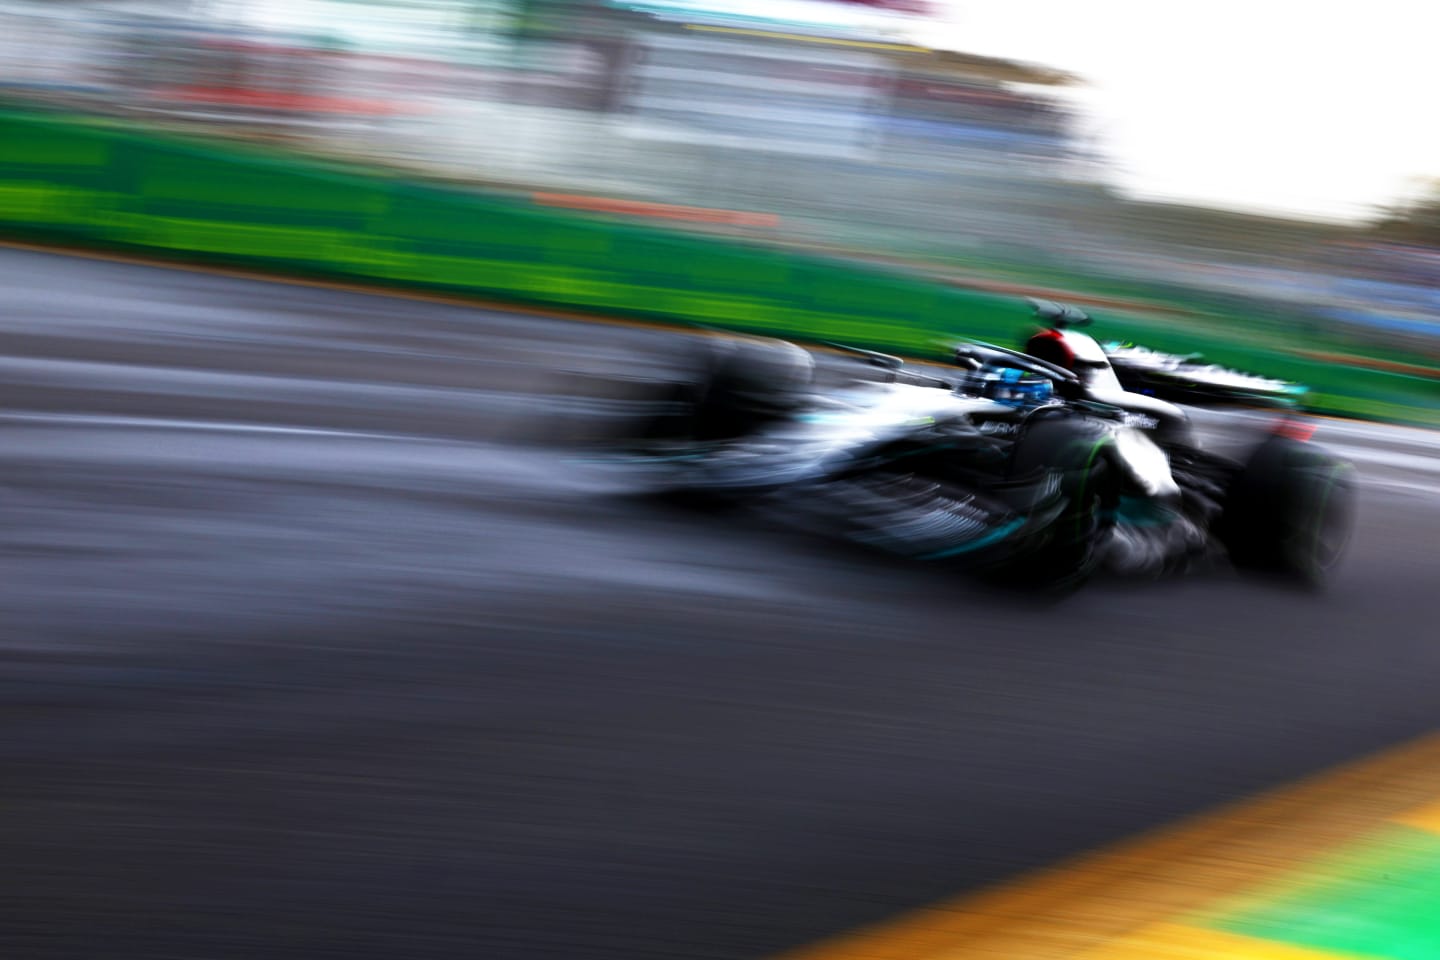 MELBOURNE, AUSTRALIA - MARCH 31: George Russell of Great Britain driving the (63) Mercedes AMG Petronas F1 Team W14 on track during practice ahead of the F1 Grand Prix of Australia at Albert Park Grand Prix Circuit on March 31, 2023 in Melbourne, Australia. (Photo by Mark Thompson/Getty Images)